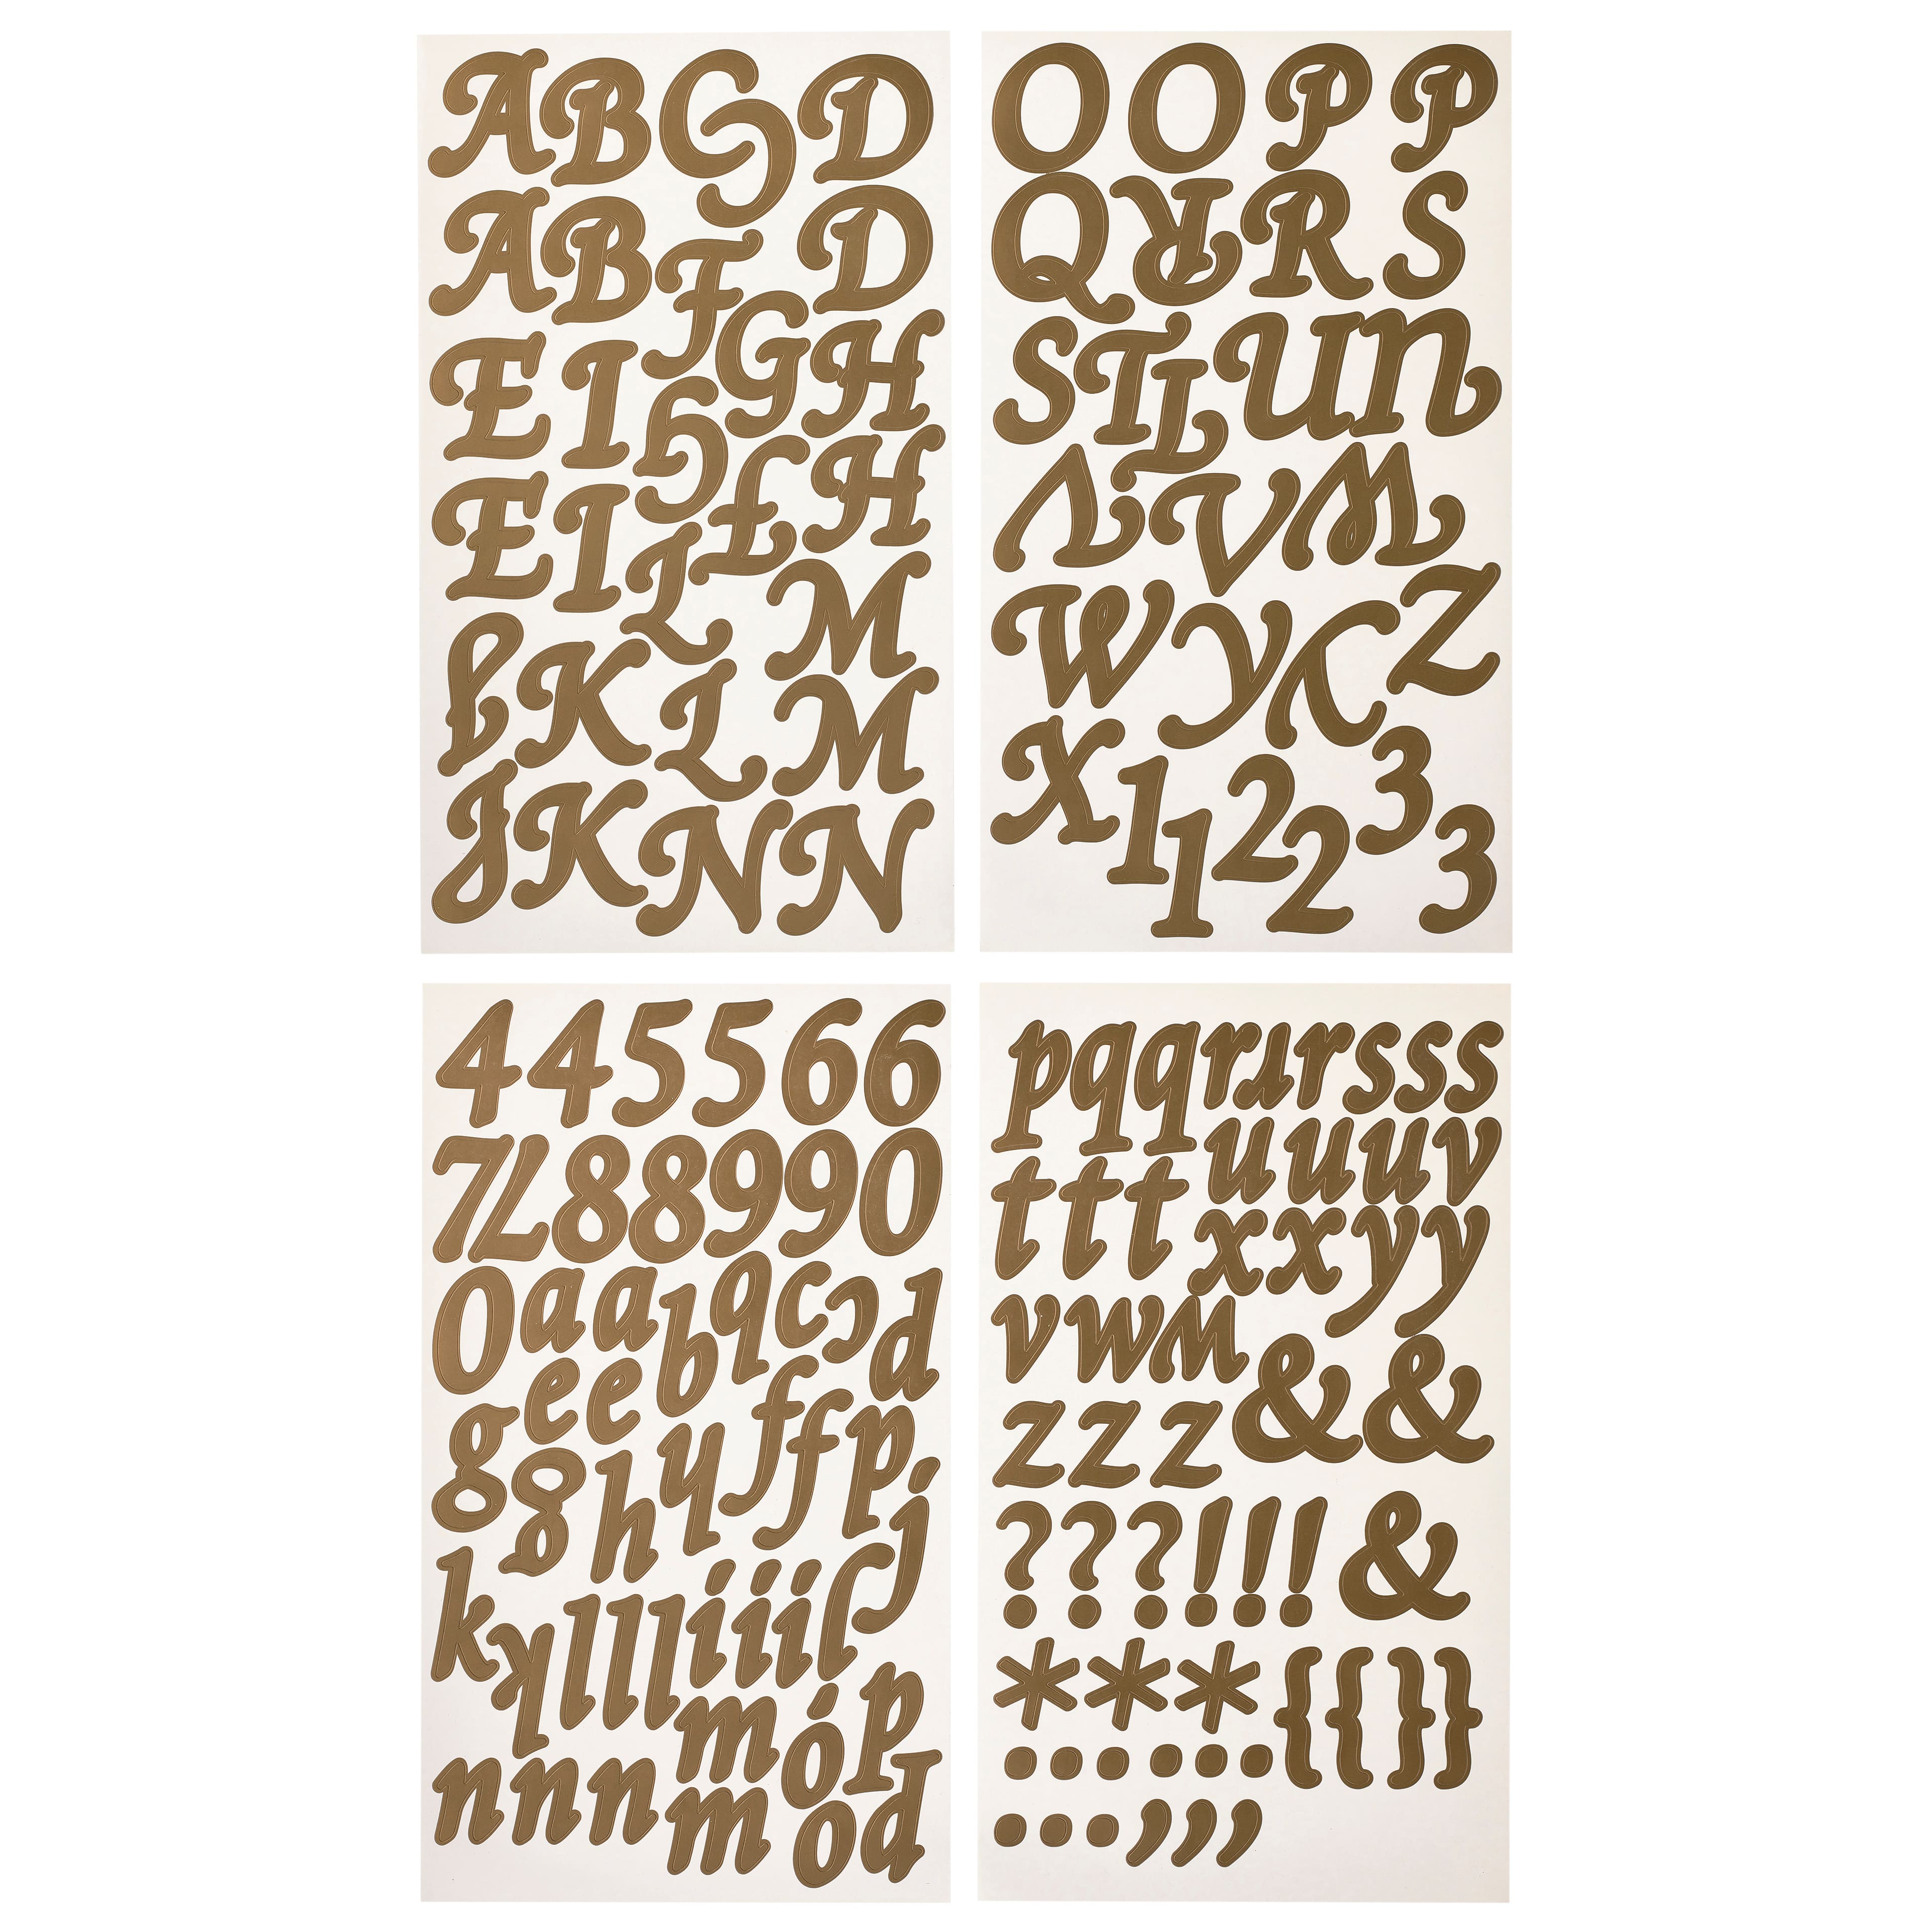 Black Mini Font Letter & Number Stickers by Recollections™